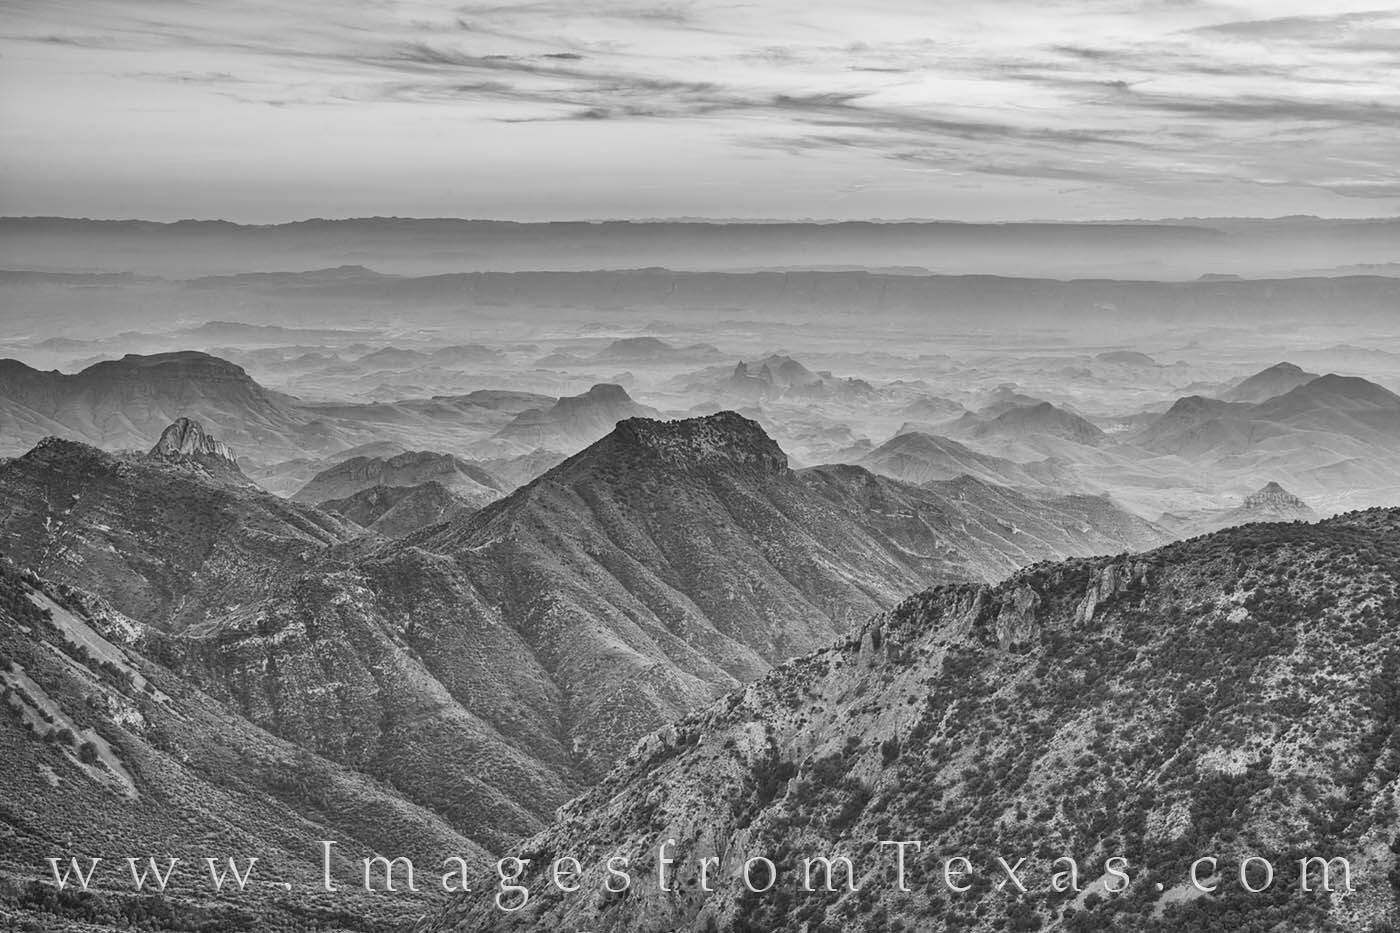 From the highest point in Big Bend National Park, this black and white image comes from Emory Peak on a beautiful November evening...